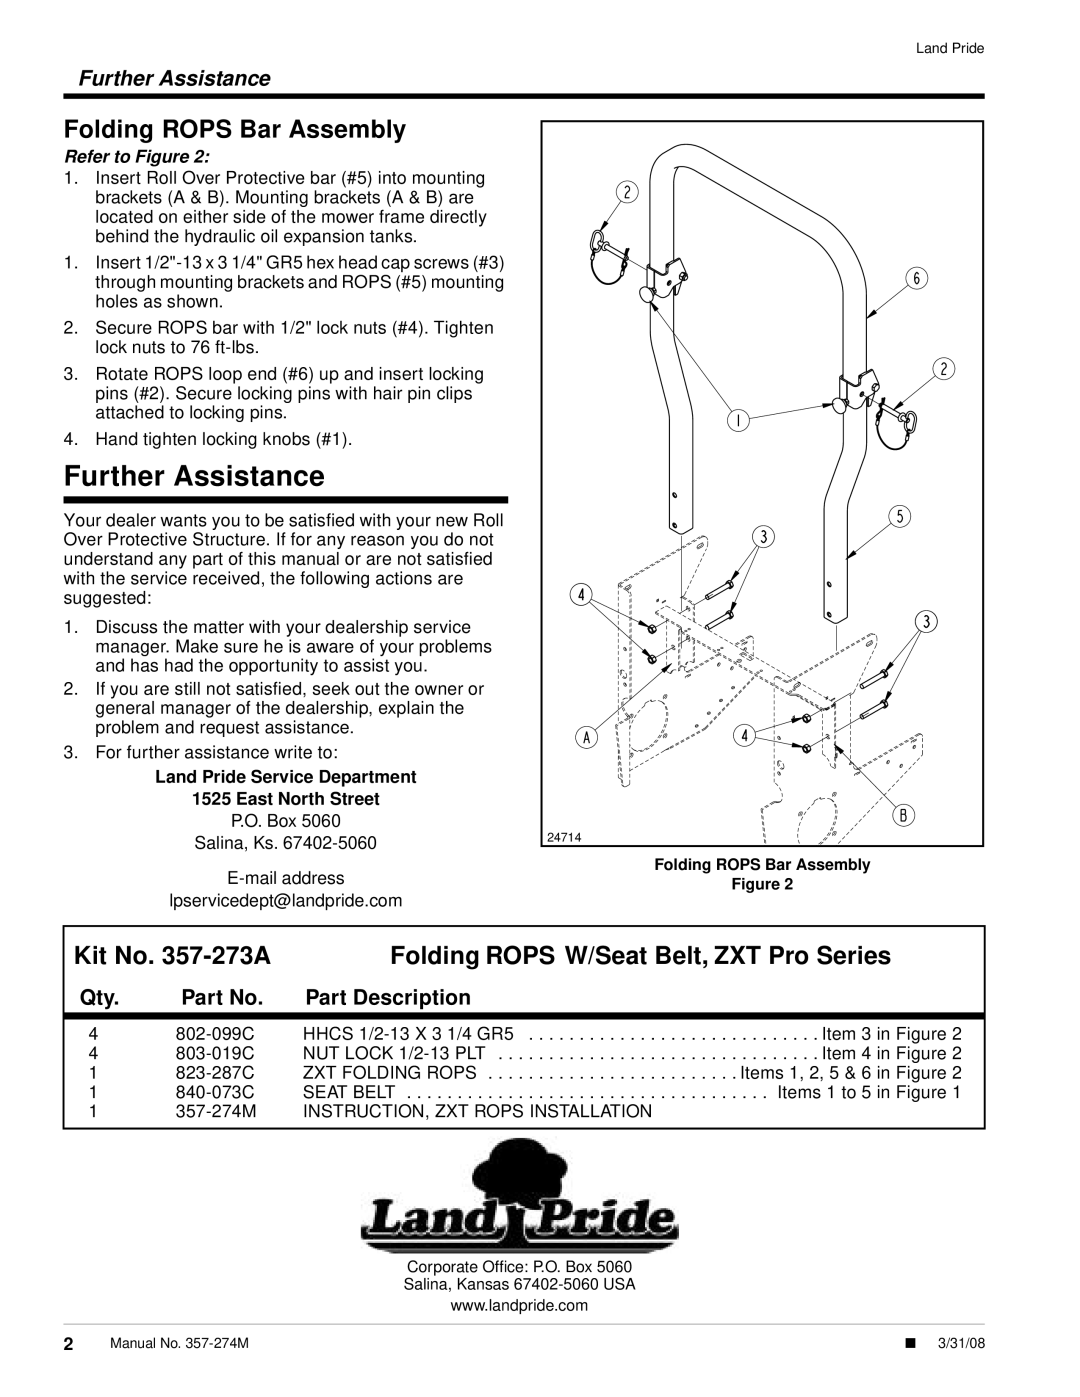 Land Pride ZXT72 Pro Further Assistance, Folding ROPS Bar Assembly, Kit No. 357-273A, Refer to Figure, East North Street 